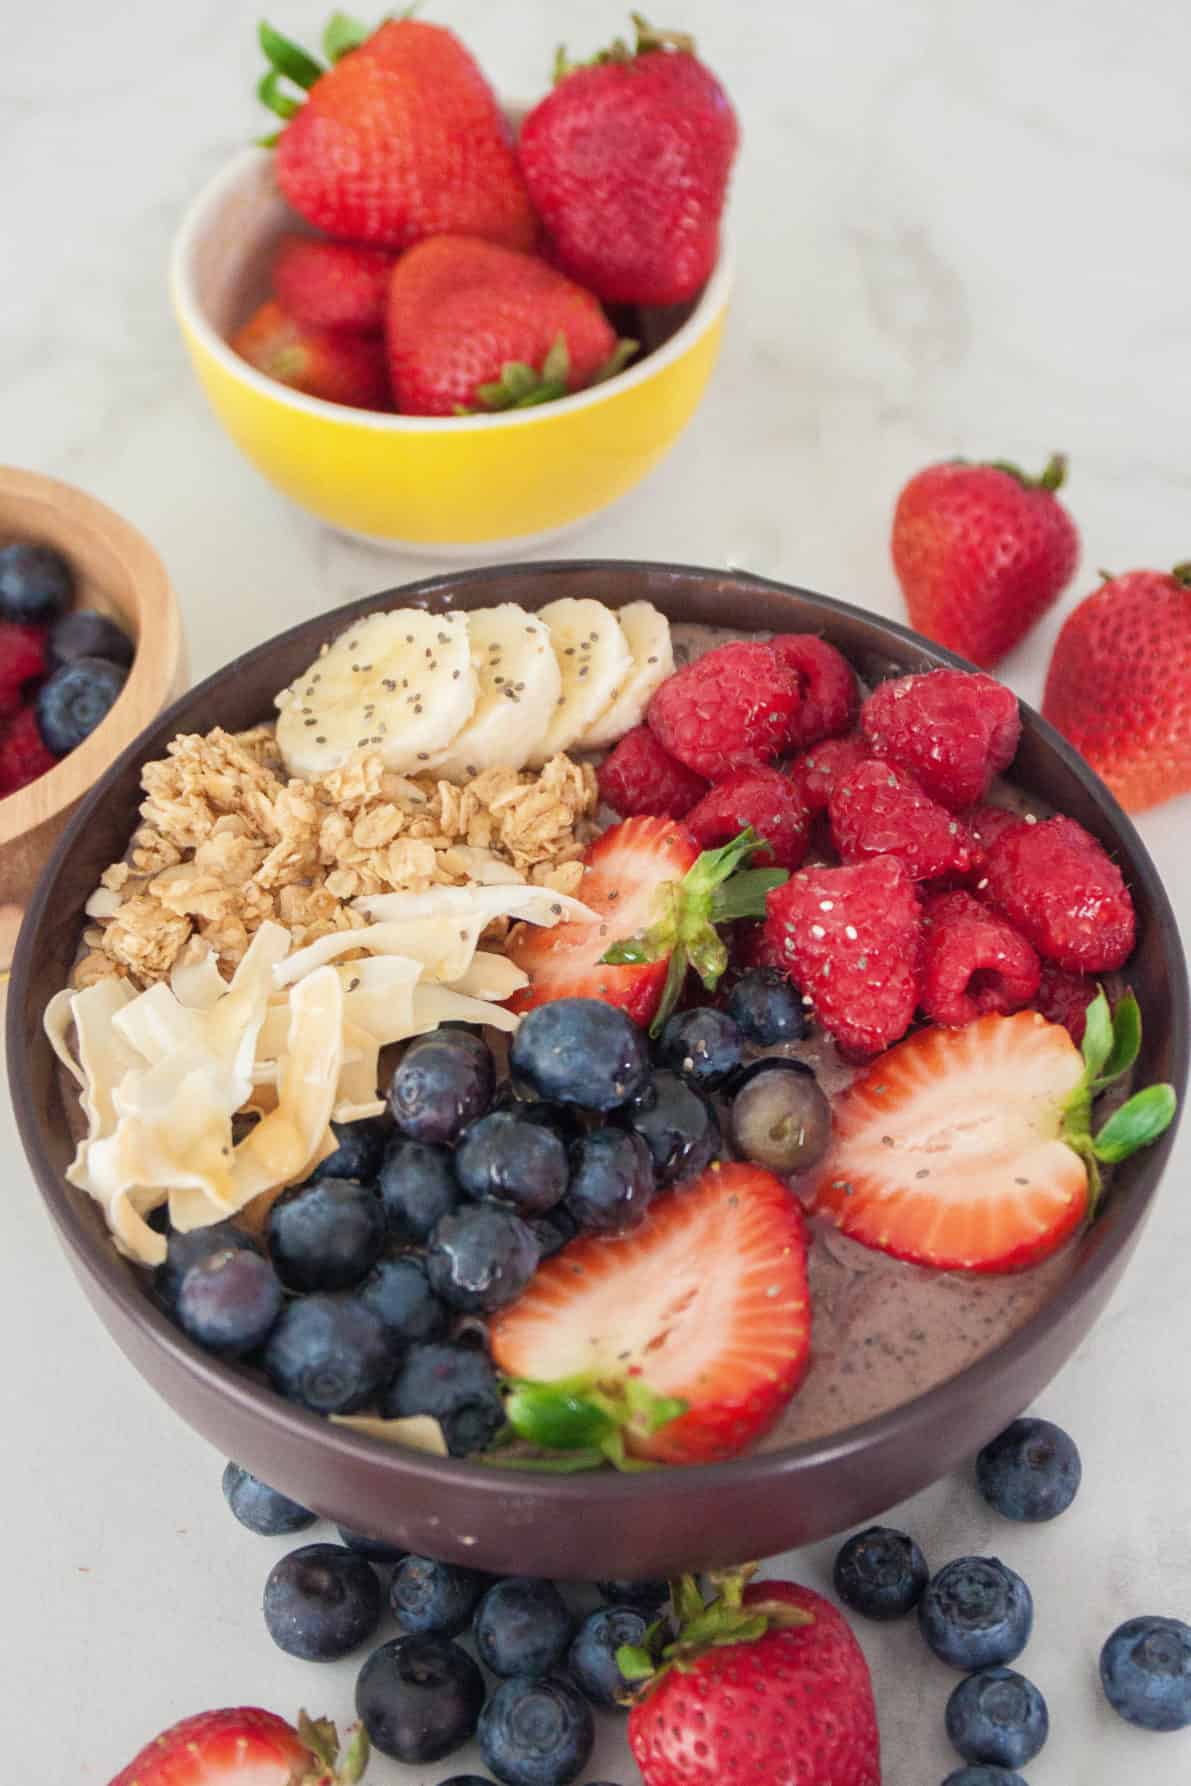 Homemade Hawaiian Acai Bowl topped with fresh berries and other tasty toppings.